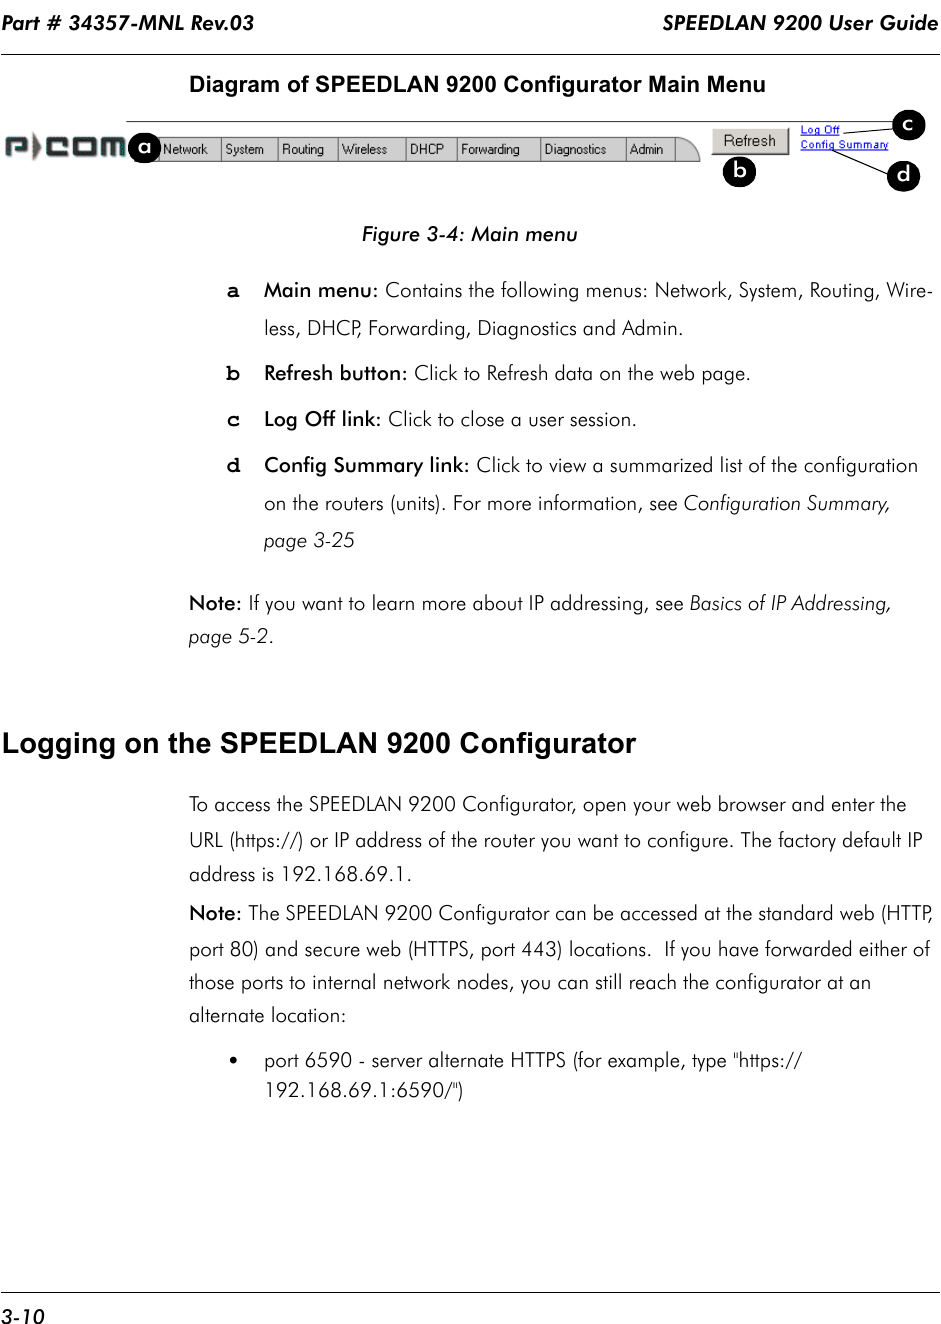 Part # 34357-MNL Rev.03                                                                   SPEEDLAN 9200 User Guide 3-10Diagram of SPEEDLAN 9200 Configurator Main MenuFigure 3-4: Main menua   Main menu: Contains the following menus: Network, System, Routing, Wire-less, DHCP, Forwarding, Diagnostics and Admin.bRefresh button: Click to Refresh data on the web page.cLog Off link: Click to close a user session.dConfig Summary link: Click to view a summarized list of the configuration on the routers (units). For more information, see Configuration Summary, page 3-25Note: If you want to learn more about IP addressing, see Basics of IP Addressing, page 5-2.Logging on the SPEEDLAN 9200 ConfiguratorTo access the SPEEDLAN 9200 Configurator, open your web browser and enter the URL (https://) or IP address of the router you want to configure. The factory default IP address is 192.168.69.1. Note: The SPEEDLAN 9200 Configurator can be accessed at the standard web (HTTP, port 80) and secure web (HTTPS, port 443) locations.  If you have forwarded either of those ports to internal network nodes, you can still reach the configurator at an alternate location: •port 6590 - server alternate HTTPS (for example, type &quot;https://192.168.69.1:6590/&quot;)dabcd